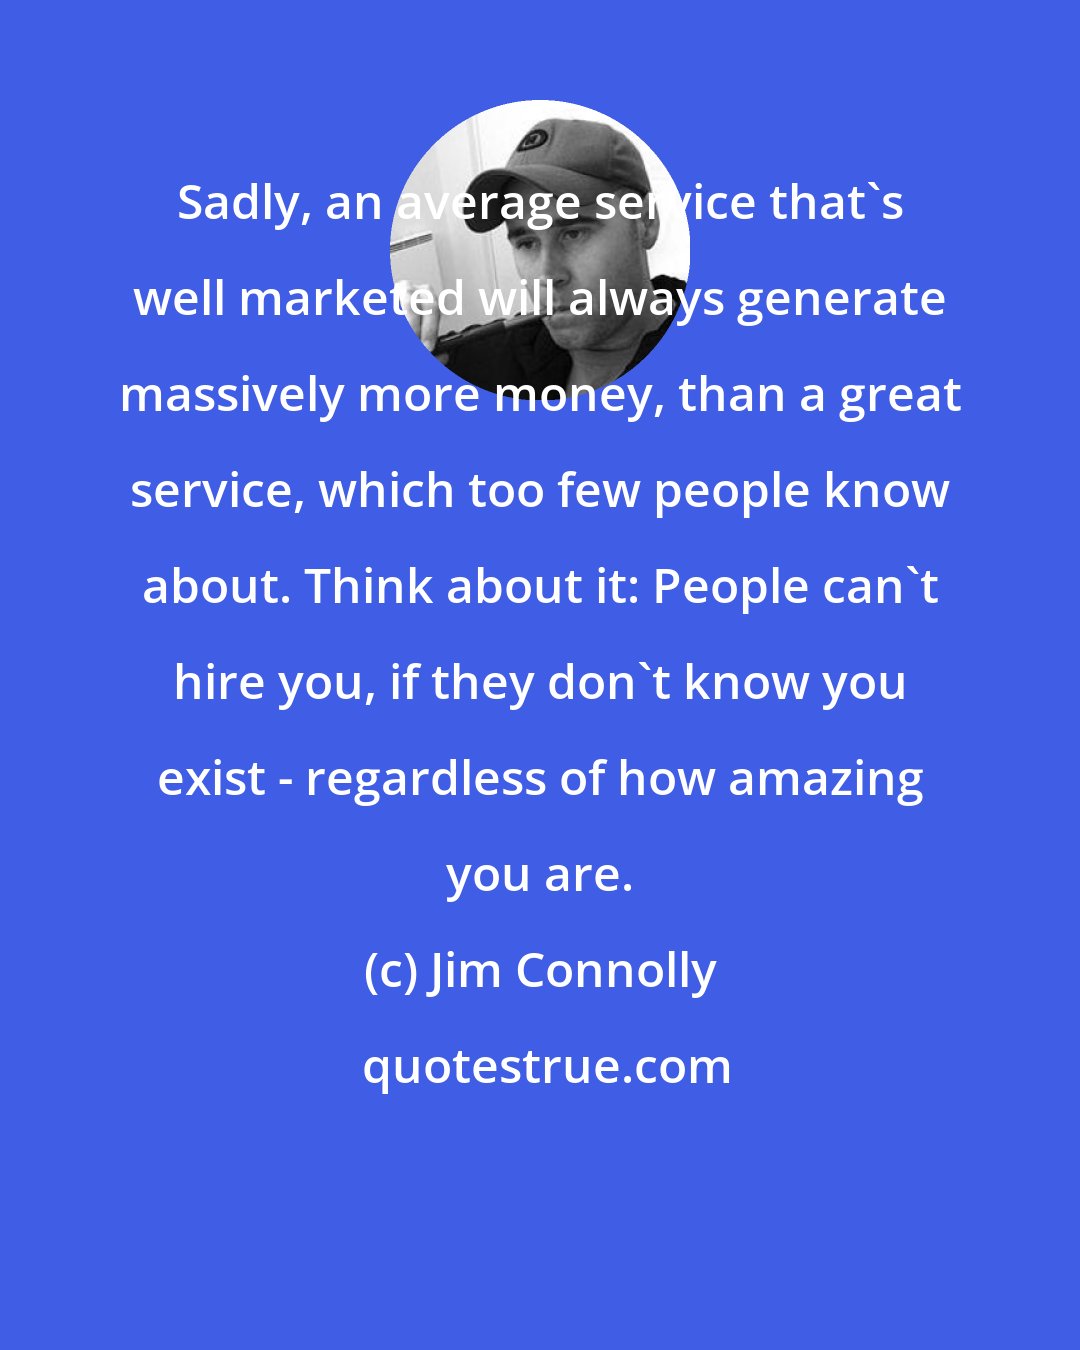 Jim Connolly: Sadly, an average service that's well marketed will always generate massively more money, than a great service, which too few people know about. Think about it: People can't hire you, if they don't know you exist - regardless of how amazing you are.